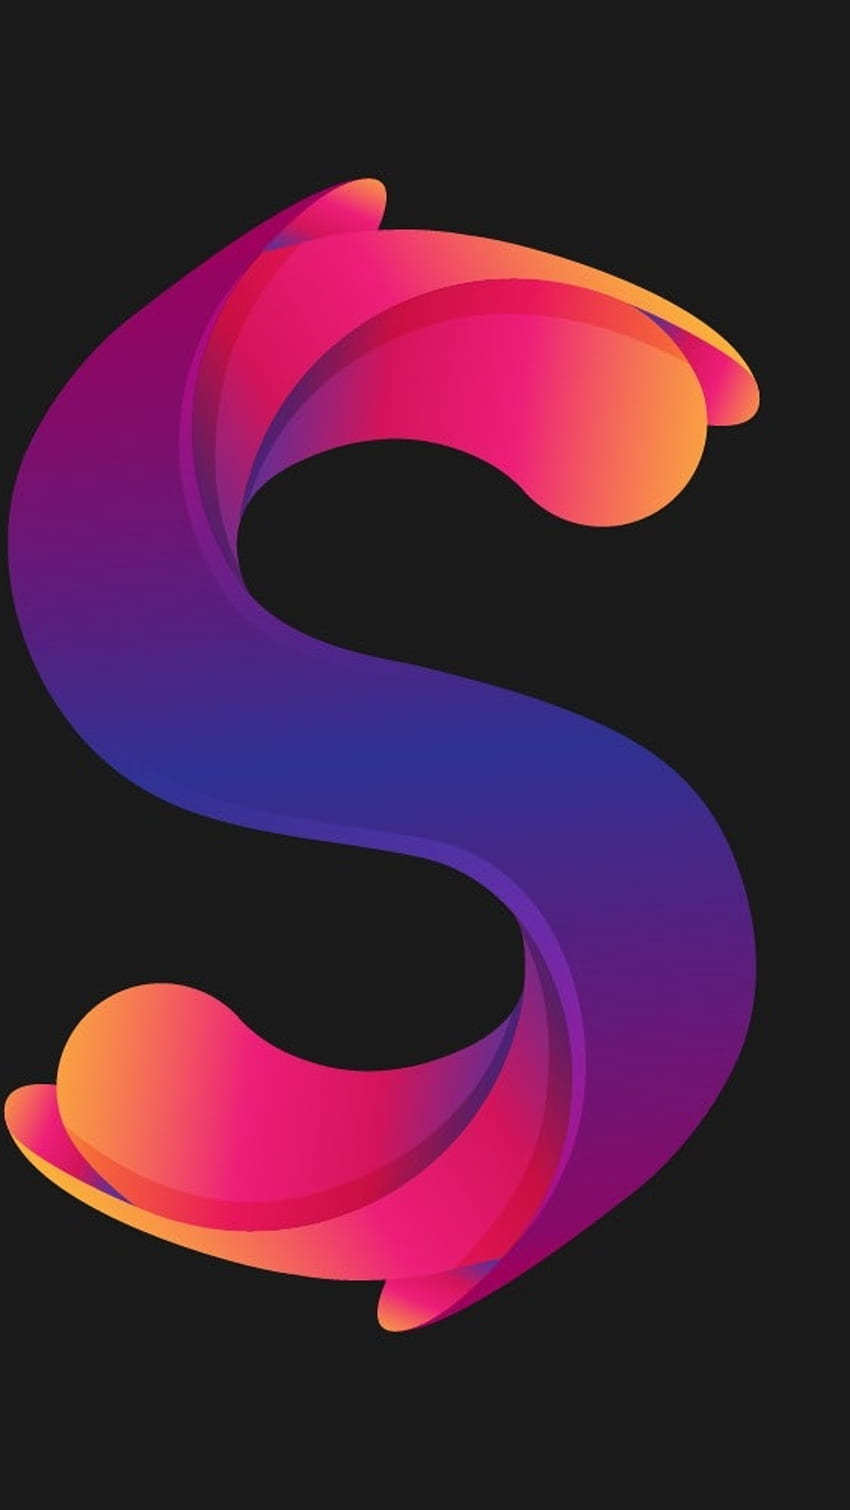 Search Results for s m alphabets wallpapers  Adorable Wallpapers  Live  wallpaper iphone New wallpaper iphone S wallpaper hd